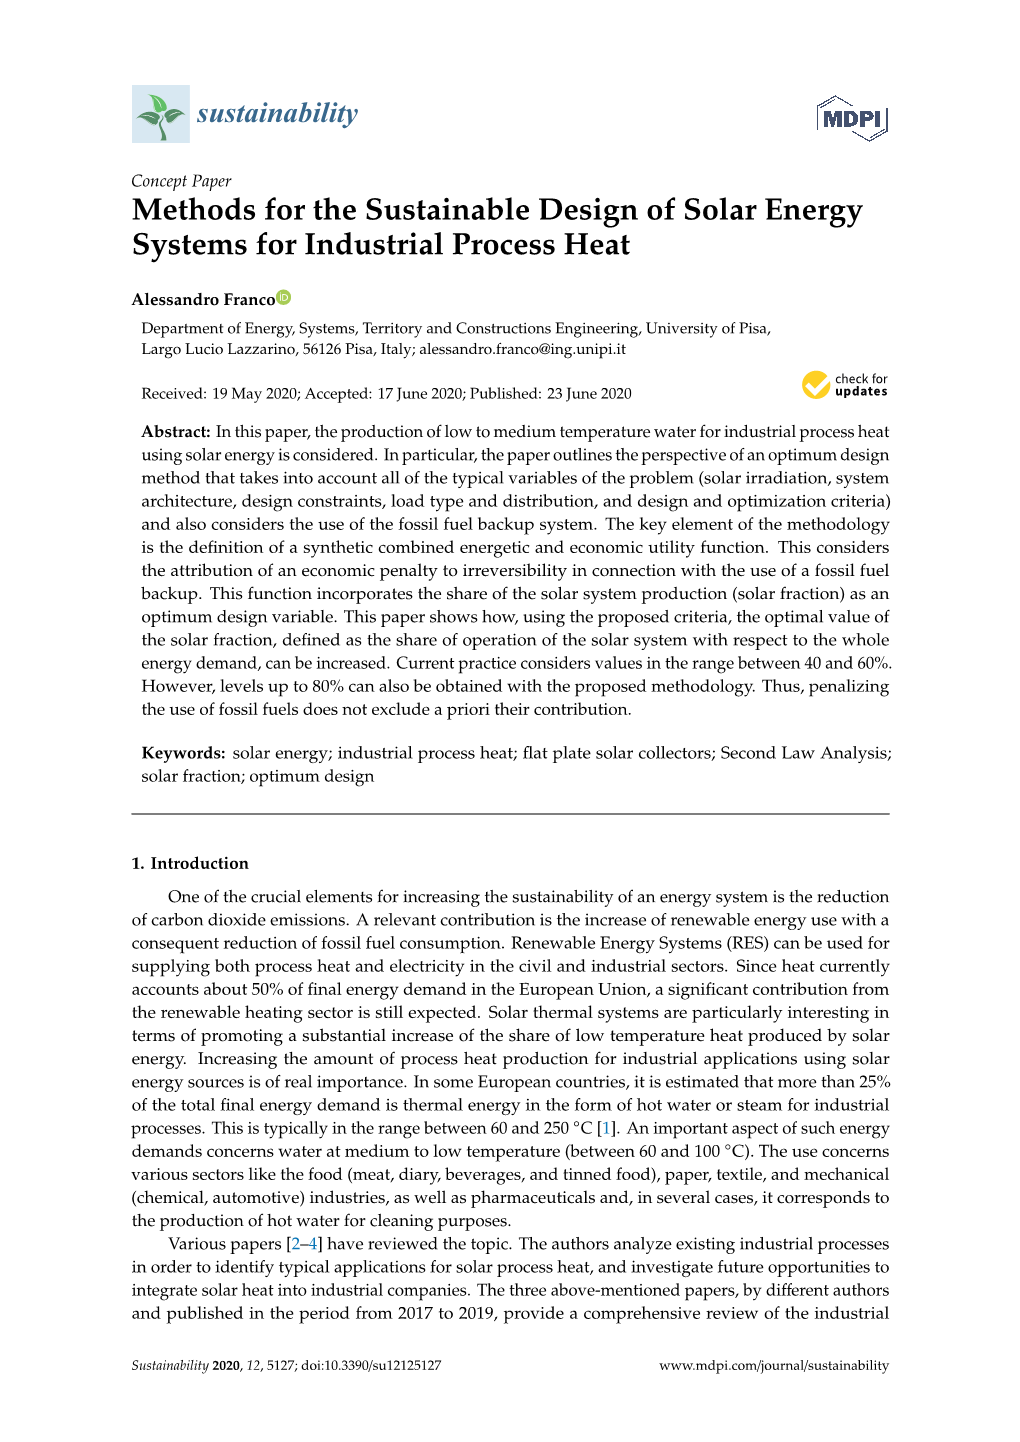 Methods for the Sustainable Design of Solar Energy Systems for Industrial Process Heat